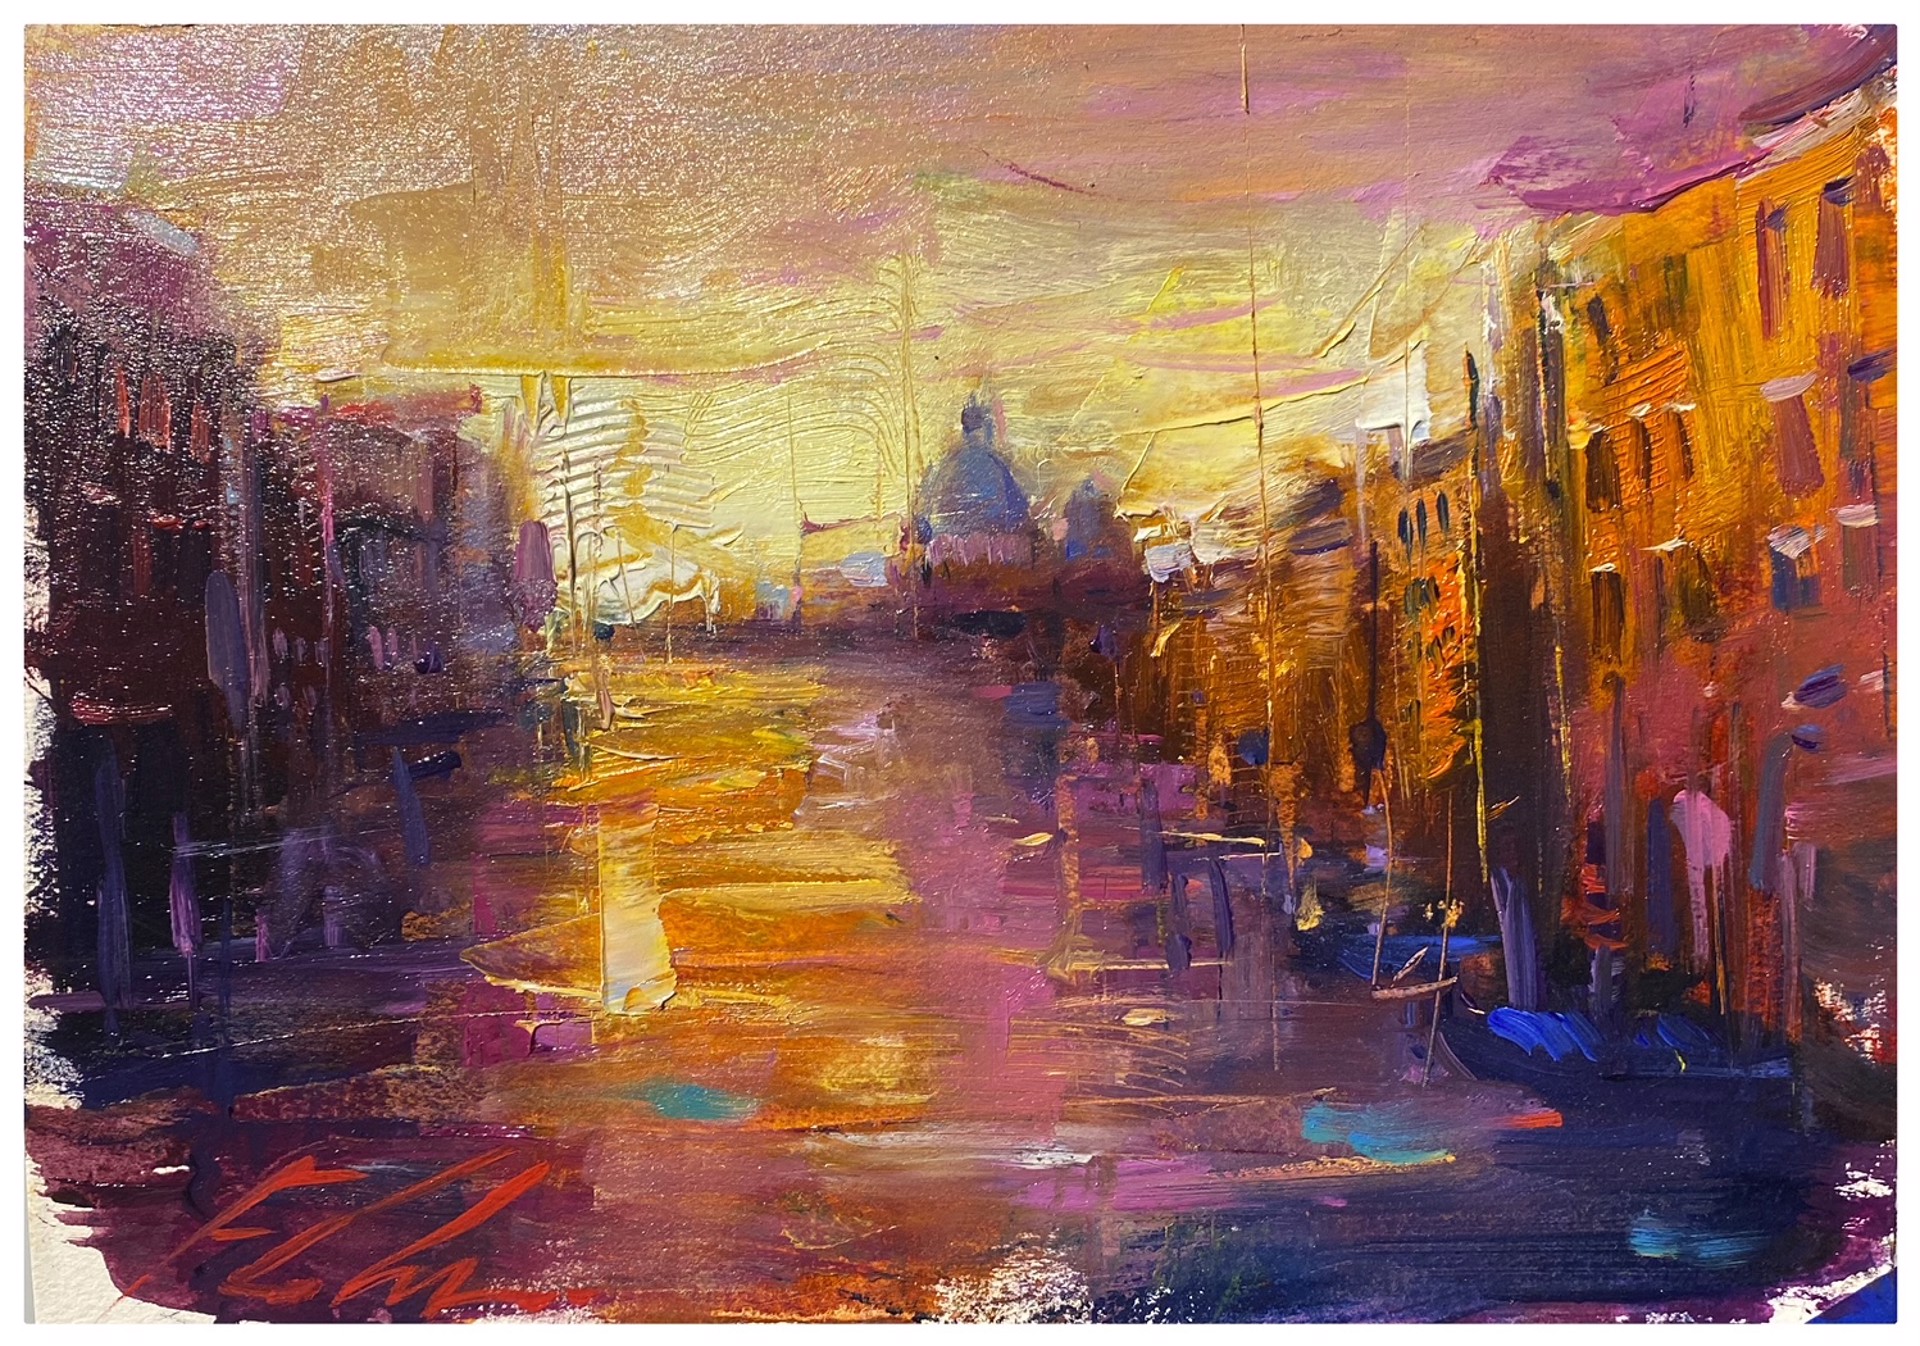 Made at show II (Canal Venice) by Michael Flohr